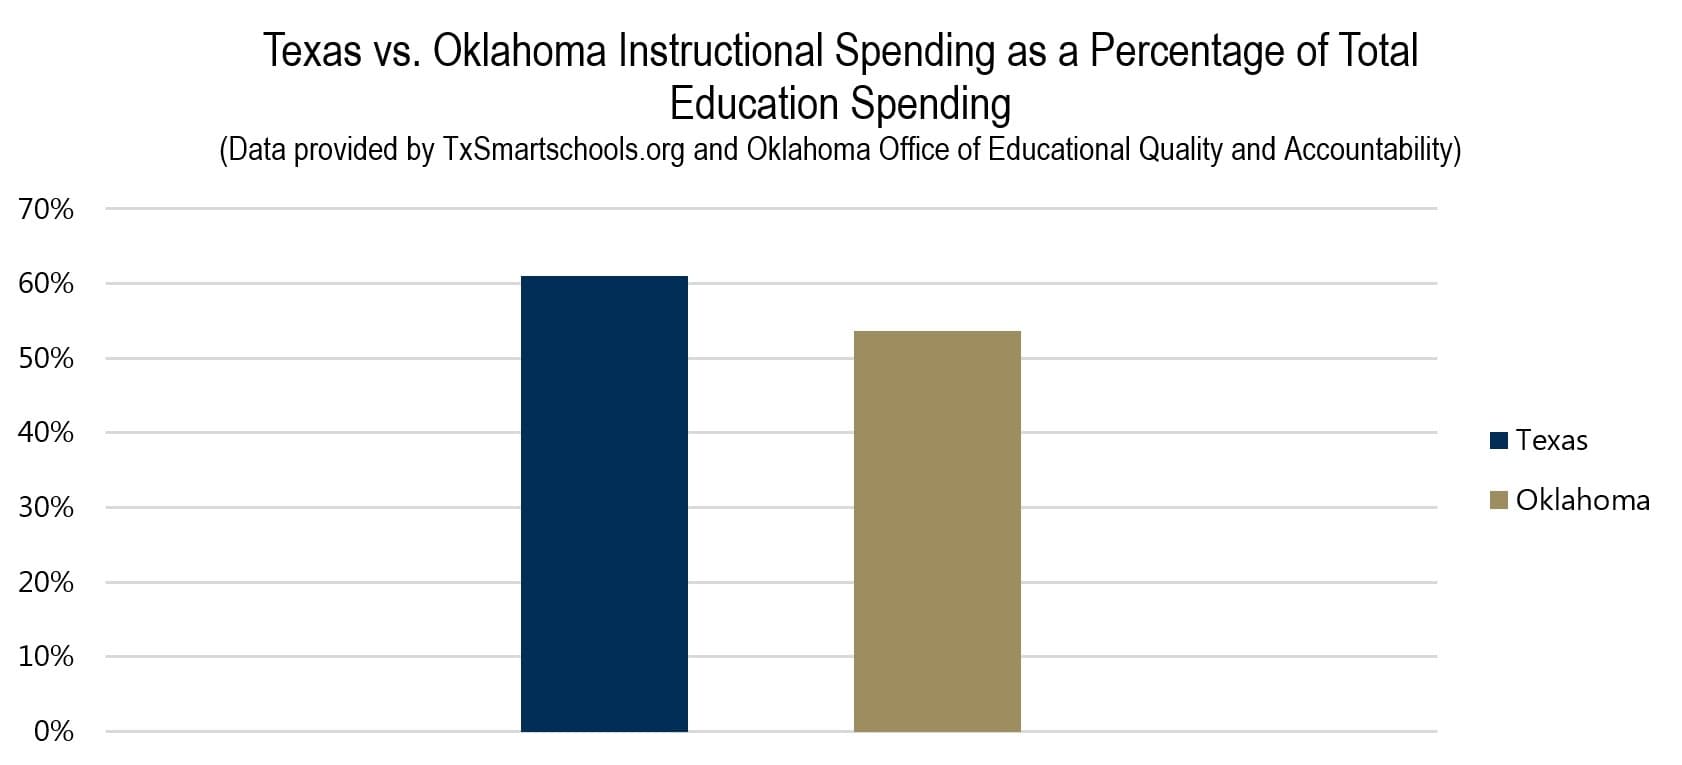 Texas vs. Oklahoma Instructional Spending as a Percentage of Total Education Spending